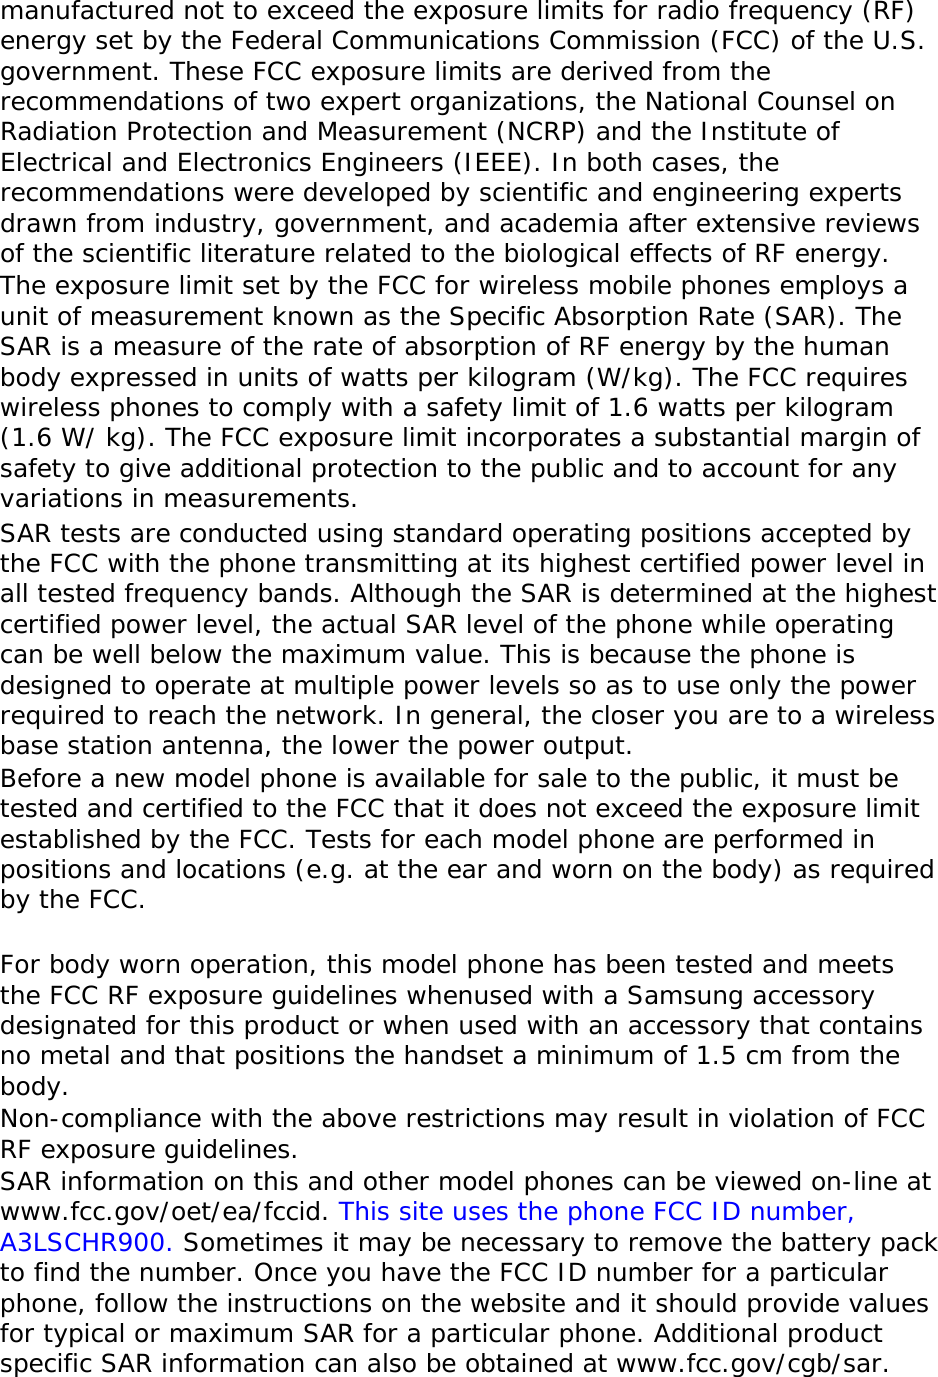 manufactured not to exceed the exposure limits for radio frequency (RF) energy set by the Federal Communications Commission (FCC) of the U.S. government. These FCC exposure limits are derived from the recommendations of two expert organizations, the National Counsel on Radiation Protection and Measurement (NCRP) and the Institute of Electrical and Electronics Engineers (IEEE). In both cases, the recommendations were developed by scientific and engineering experts drawn from industry, government, and academia after extensive reviews of the scientific literature related to the biological effects of RF energy. The exposure limit set by the FCC for wireless mobile phones employs a unit of measurement known as the Specific Absorption Rate (SAR). The SAR is a measure of the rate of absorption of RF energy by the human body expressed in units of watts per kilogram (W/kg). The FCC requires wireless phones to comply with a safety limit of 1.6 watts per kilogram (1.6 W/ kg). The FCC exposure limit incorporates a substantial margin of safety to give additional protection to the public and to account for any variations in measurements. SAR tests are conducted using standard operating positions accepted by the FCC with the phone transmitting at its highest certified power level in all tested frequency bands. Although the SAR is determined at the highest certified power level, the actual SAR level of the phone while operating can be well below the maximum value. This is because the phone is designed to operate at multiple power levels so as to use only the power required to reach the network. In general, the closer you are to a wireless base station antenna, the lower the power output. Before a new model phone is available for sale to the public, it must be tested and certified to the FCC that it does not exceed the exposure limit established by the FCC. Tests for each model phone are performed in positions and locations (e.g. at the ear and worn on the body) as required by the FCC.    For body worn operation, this model phone has been tested and meets the FCC RF exposure guidelines whenused with a Samsung accessory designated for this product or when used with an accessory that contains no metal and that positions the handset a minimum of 1.5 cm from the body.  Non-compliance with the above restrictions may result in violation of FCC RF exposure guidelines. SAR information on this and other model phones can be viewed on-line at www.fcc.gov/oet/ea/fccid. This site uses the phone FCC ID number, A3LSCHR900. Sometimes it may be necessary to remove the battery pack to find the number. Once you have the FCC ID number for a particular phone, follow the instructions on the website and it should provide values for typical or maximum SAR for a particular phone. Additional product specific SAR information can also be obtained at www.fcc.gov/cgb/sar. 